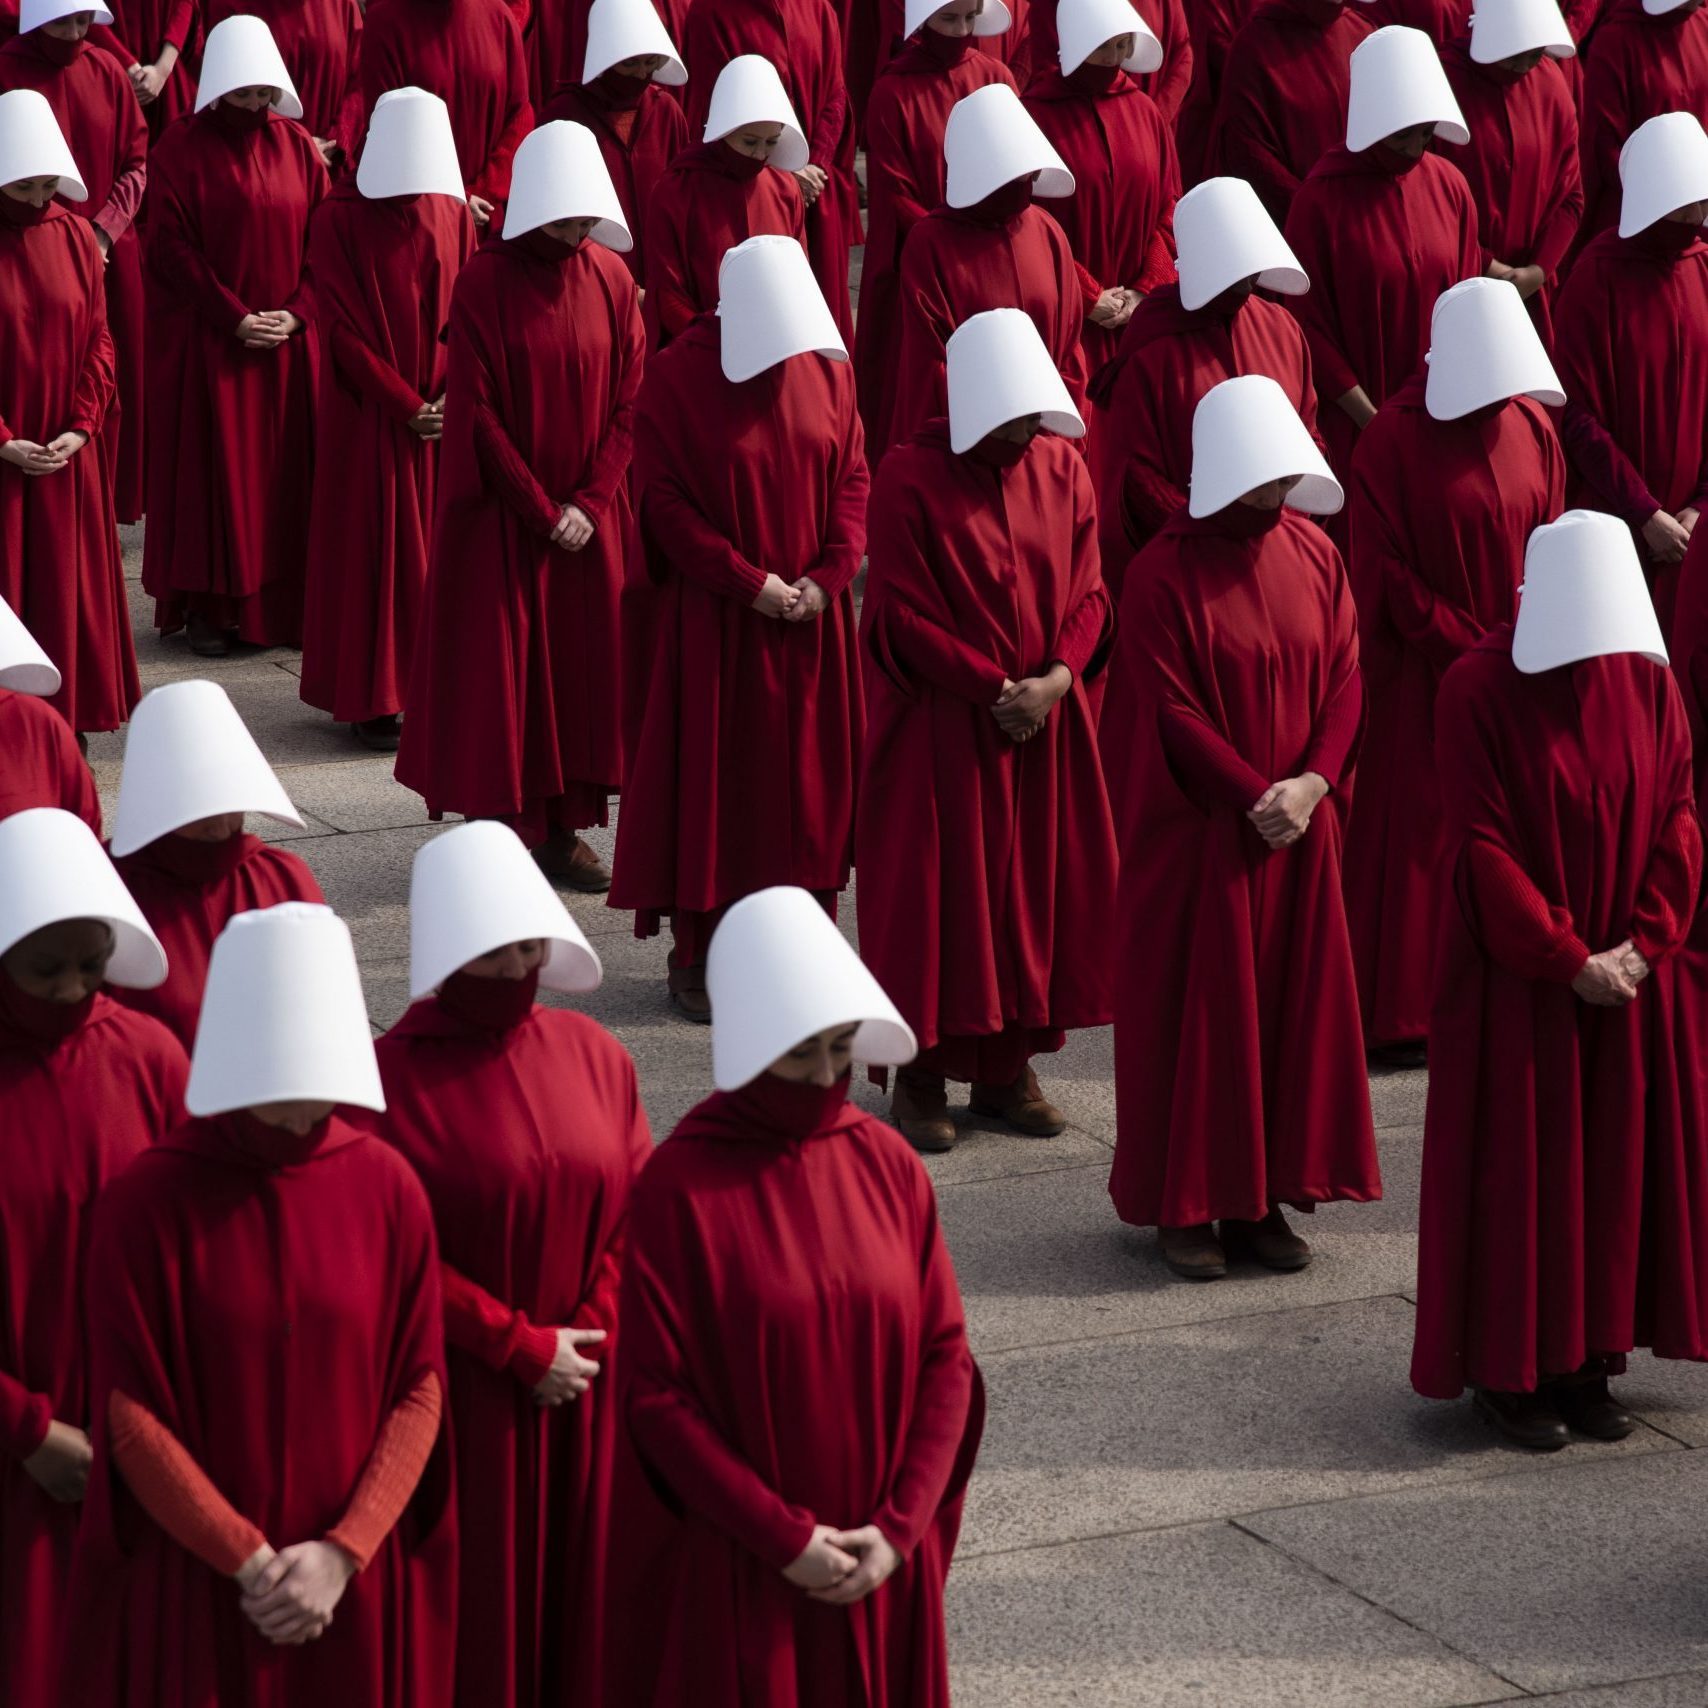 Filming of the Handmaid's Tale